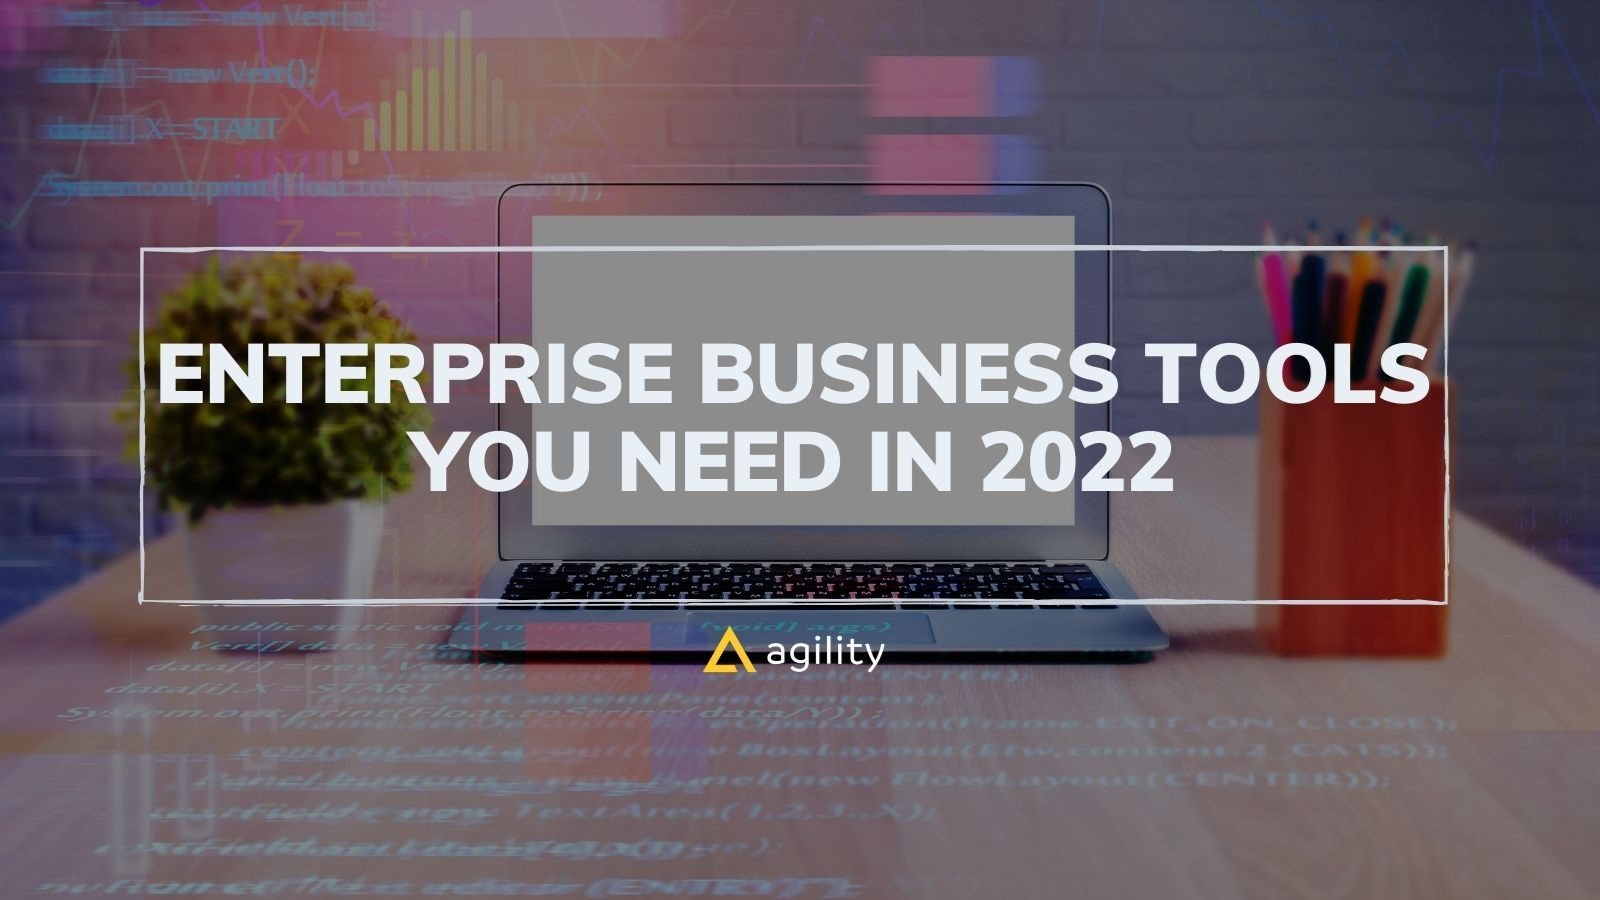 Enterprise Business Tools You Need to Succeed in 2022